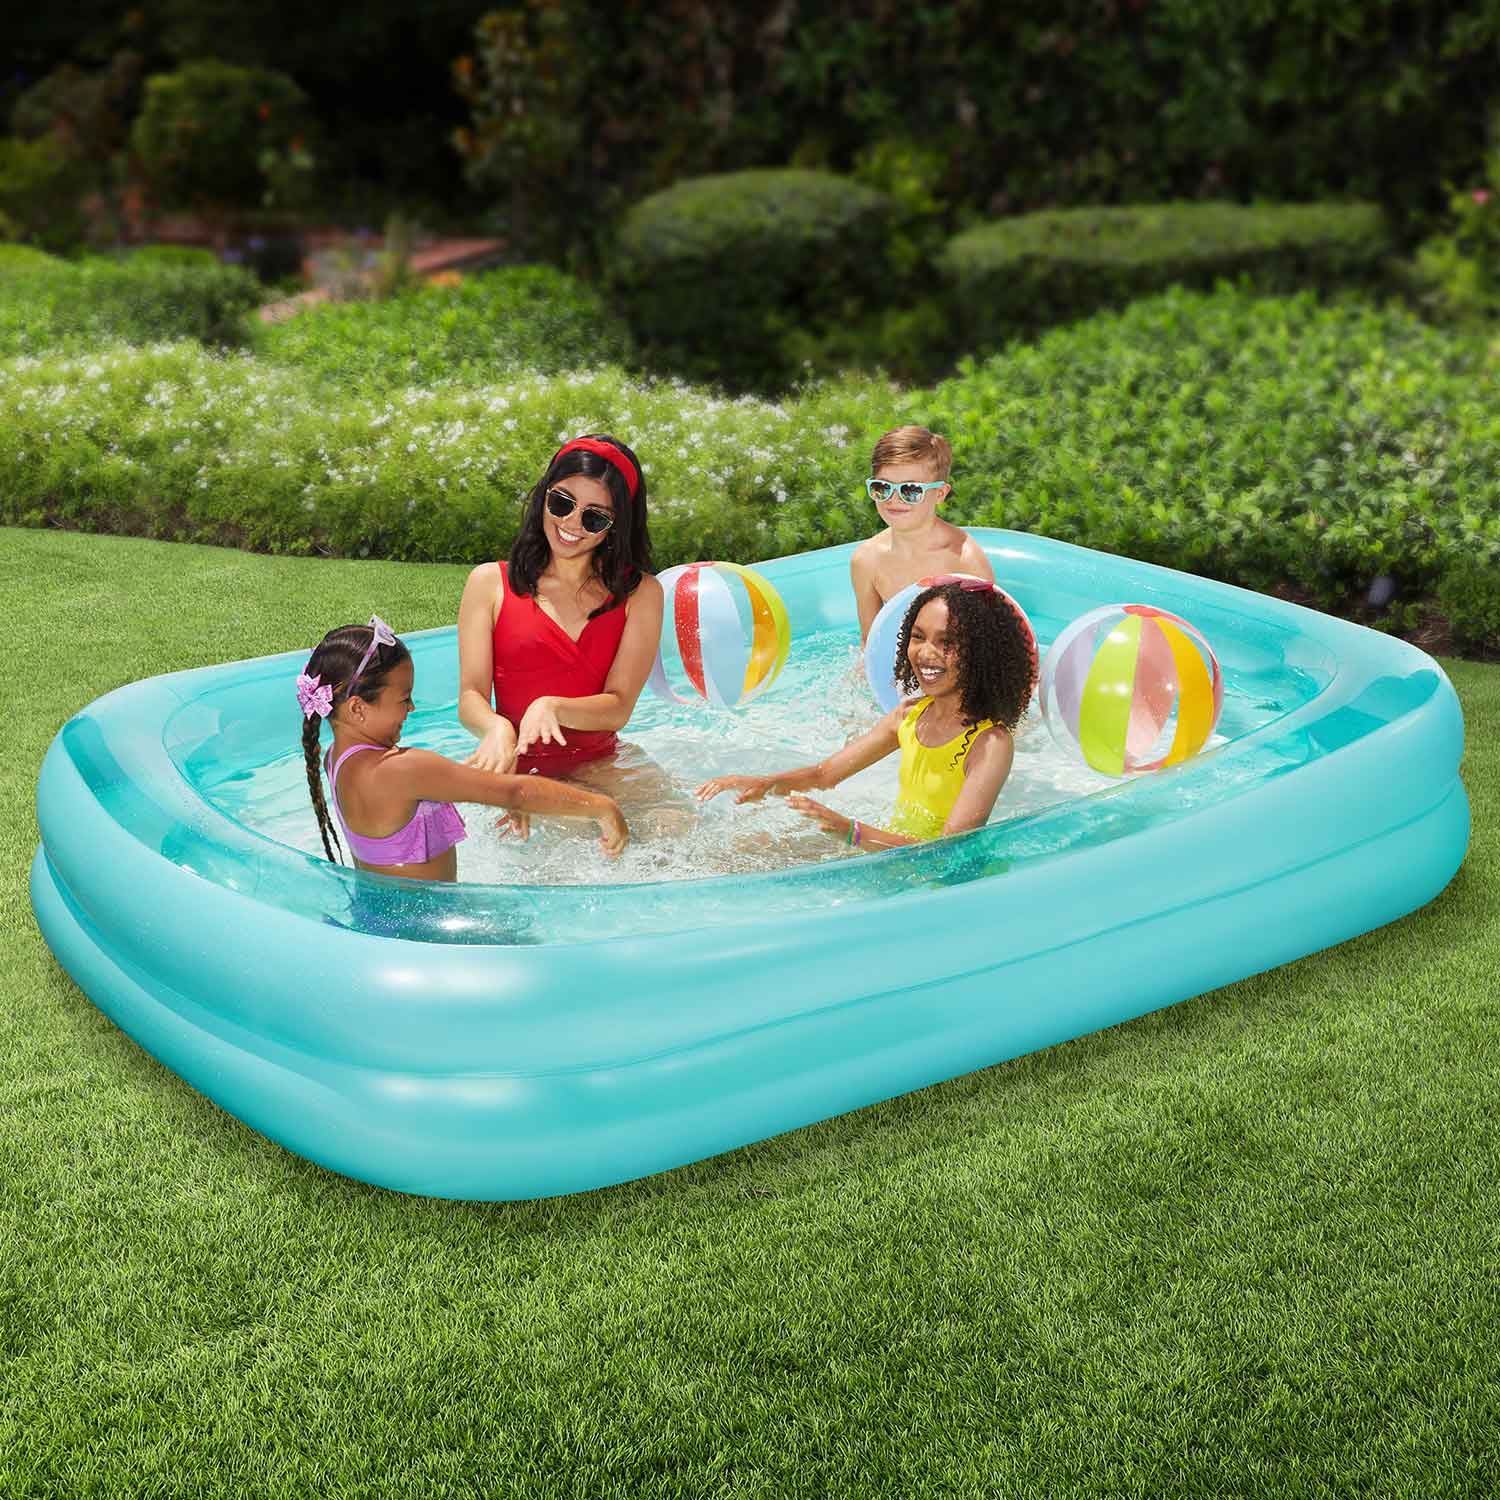 Funsicle Blissful Pool with people on a grass background